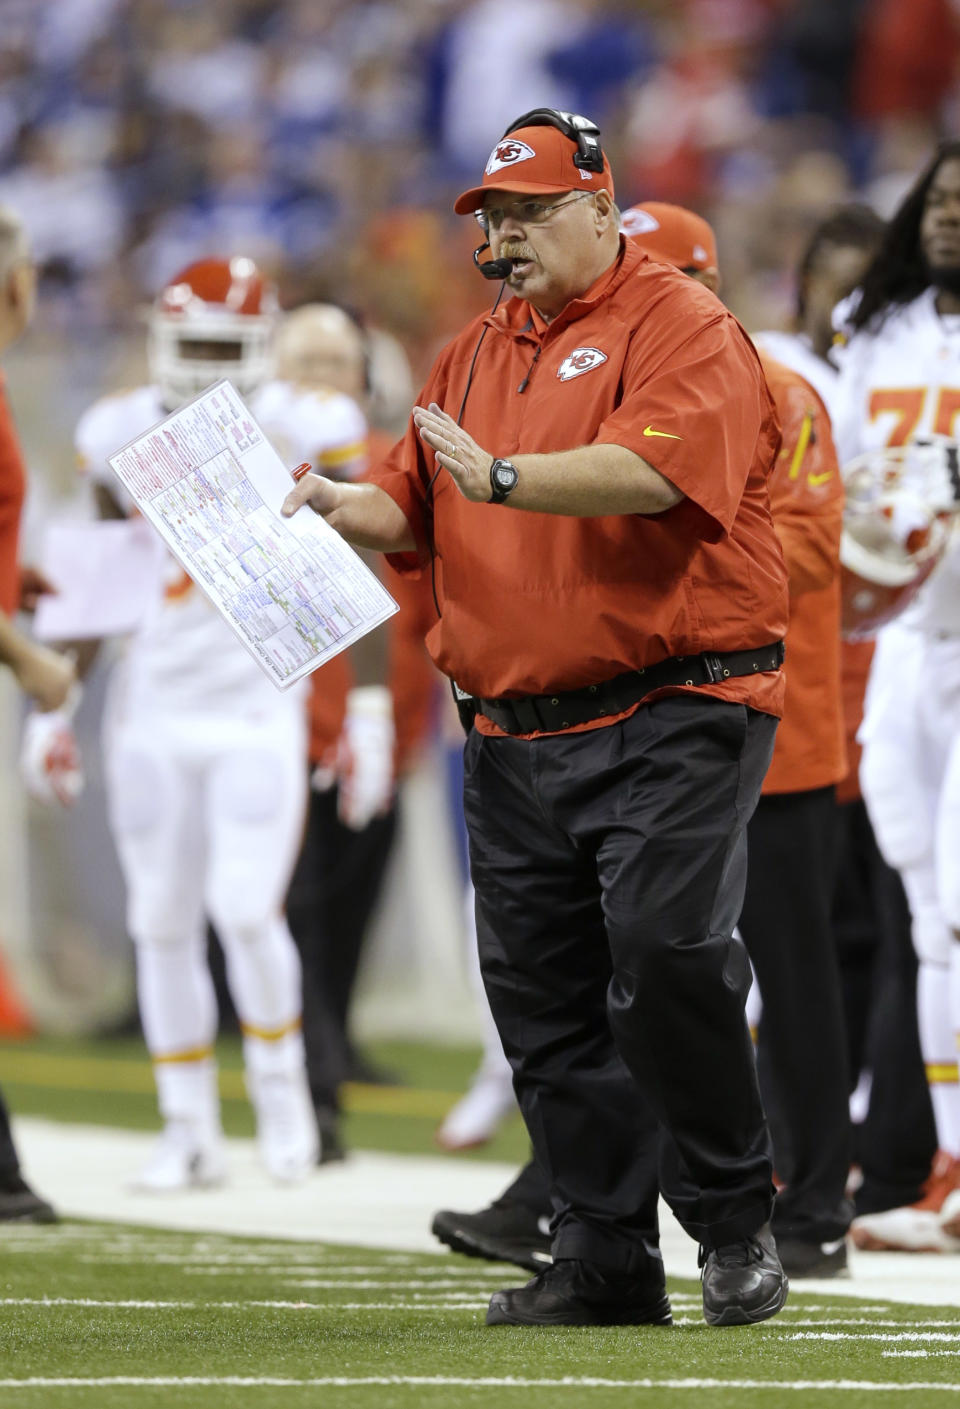 Kansas City Chiefs head coach Andy Reid directs play from the sideline against the Indianapolis Colts during the first half of an NFL wild-card playoff football game Saturday, Jan. 4, 2014, in Indianapolis. (AP Photo/Michael Conroy)